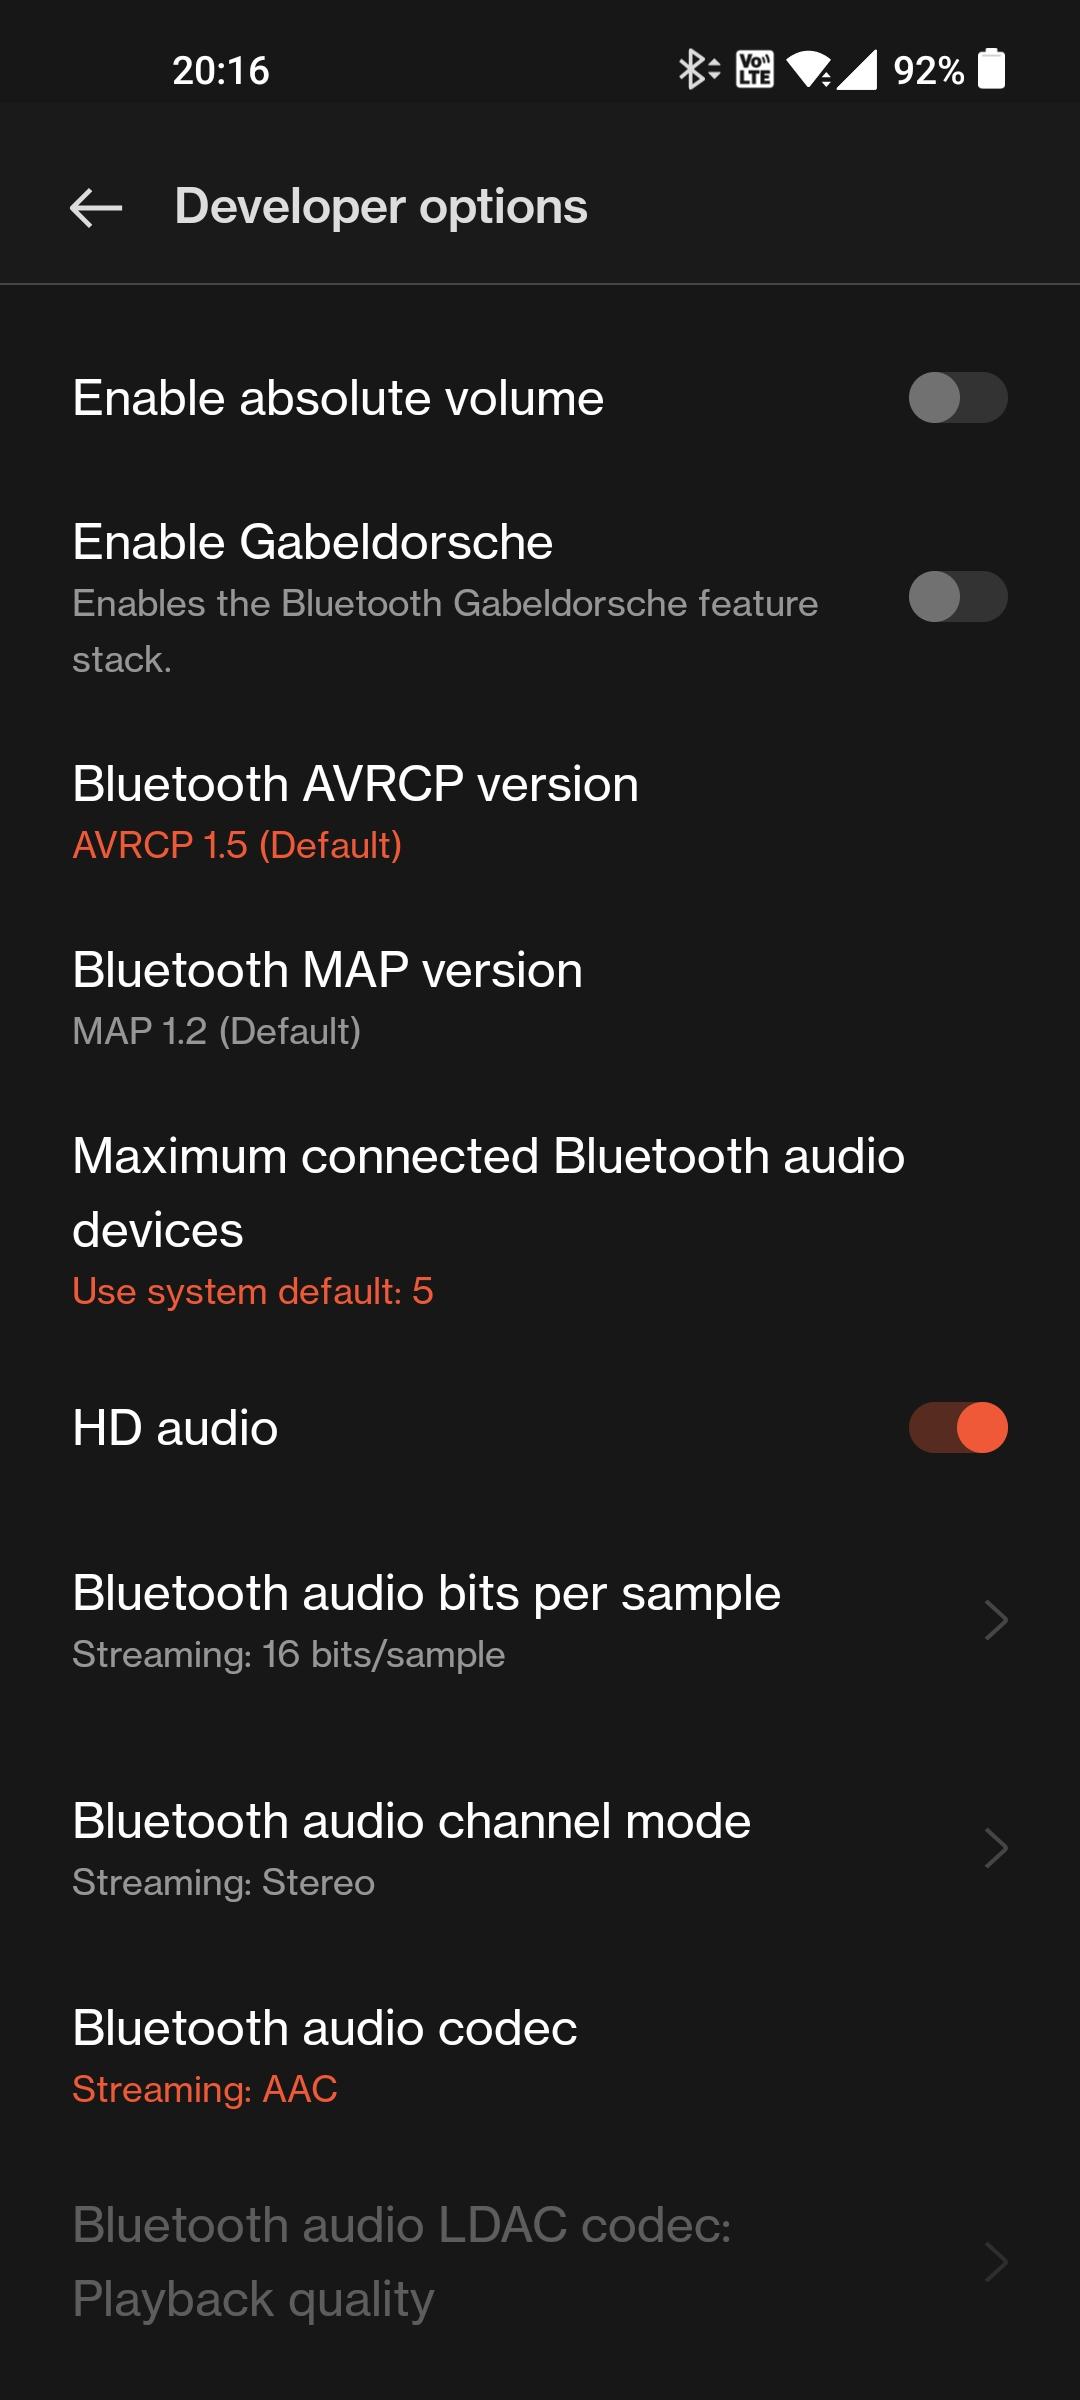 How to disable Bluetooth Absolute Volume on Android 2